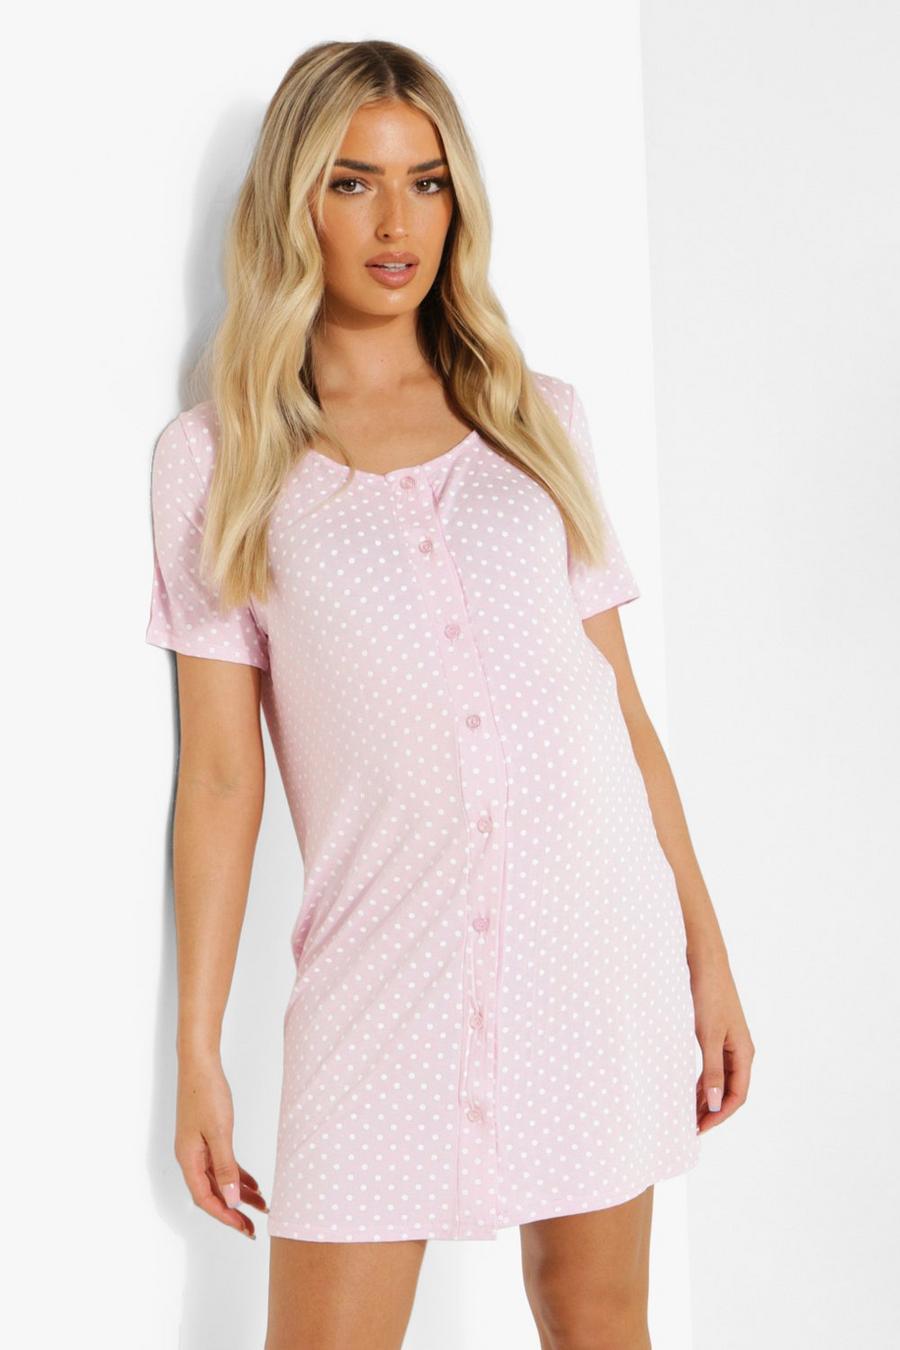 Baby pink Maternity Polka Dot Button Front Nightie